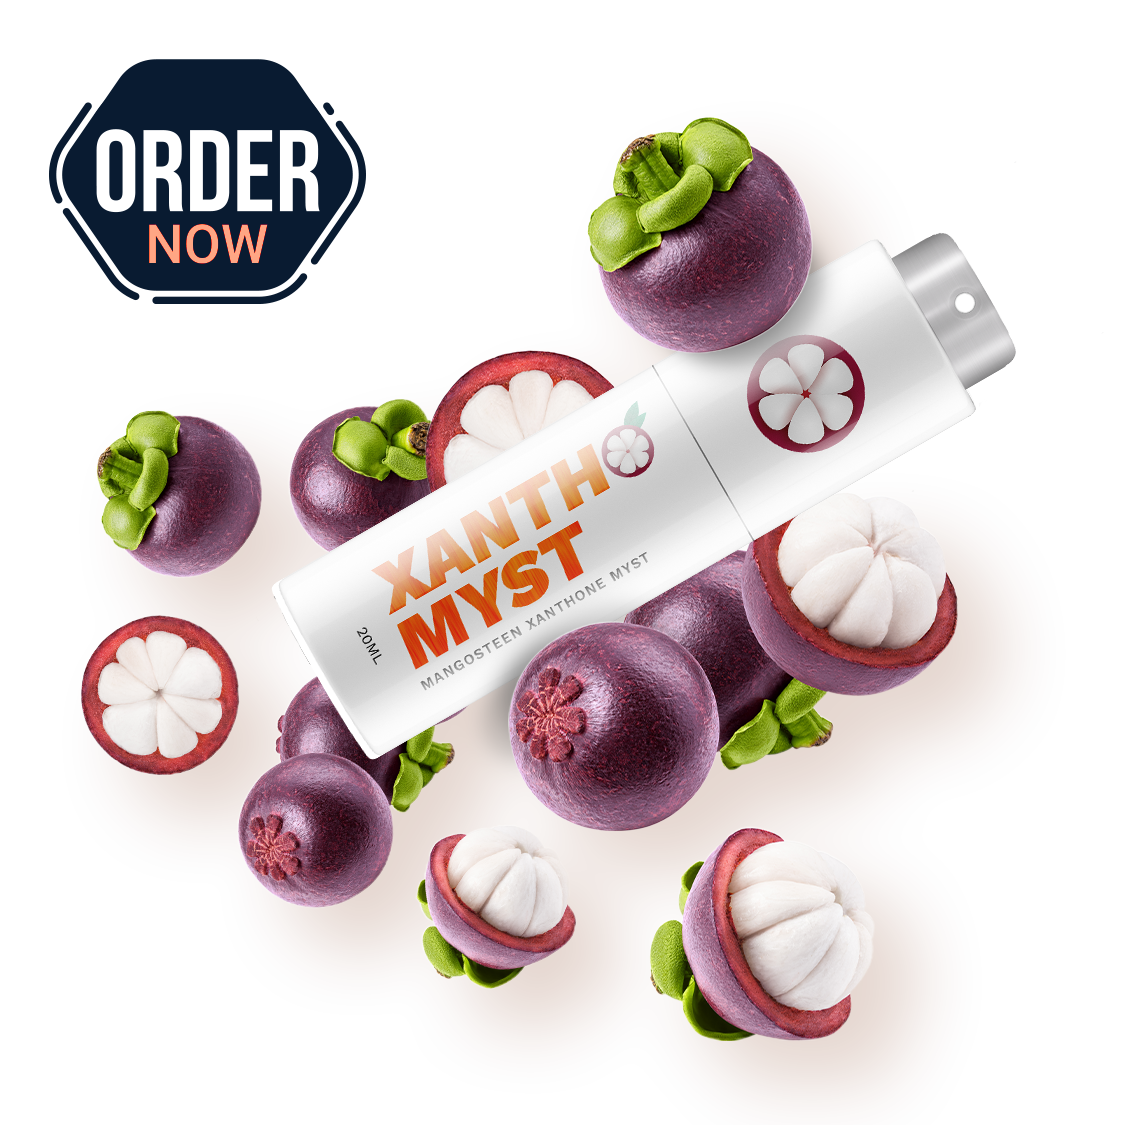 Mangosteen based product called Xanthomyst Grand Rapids MI